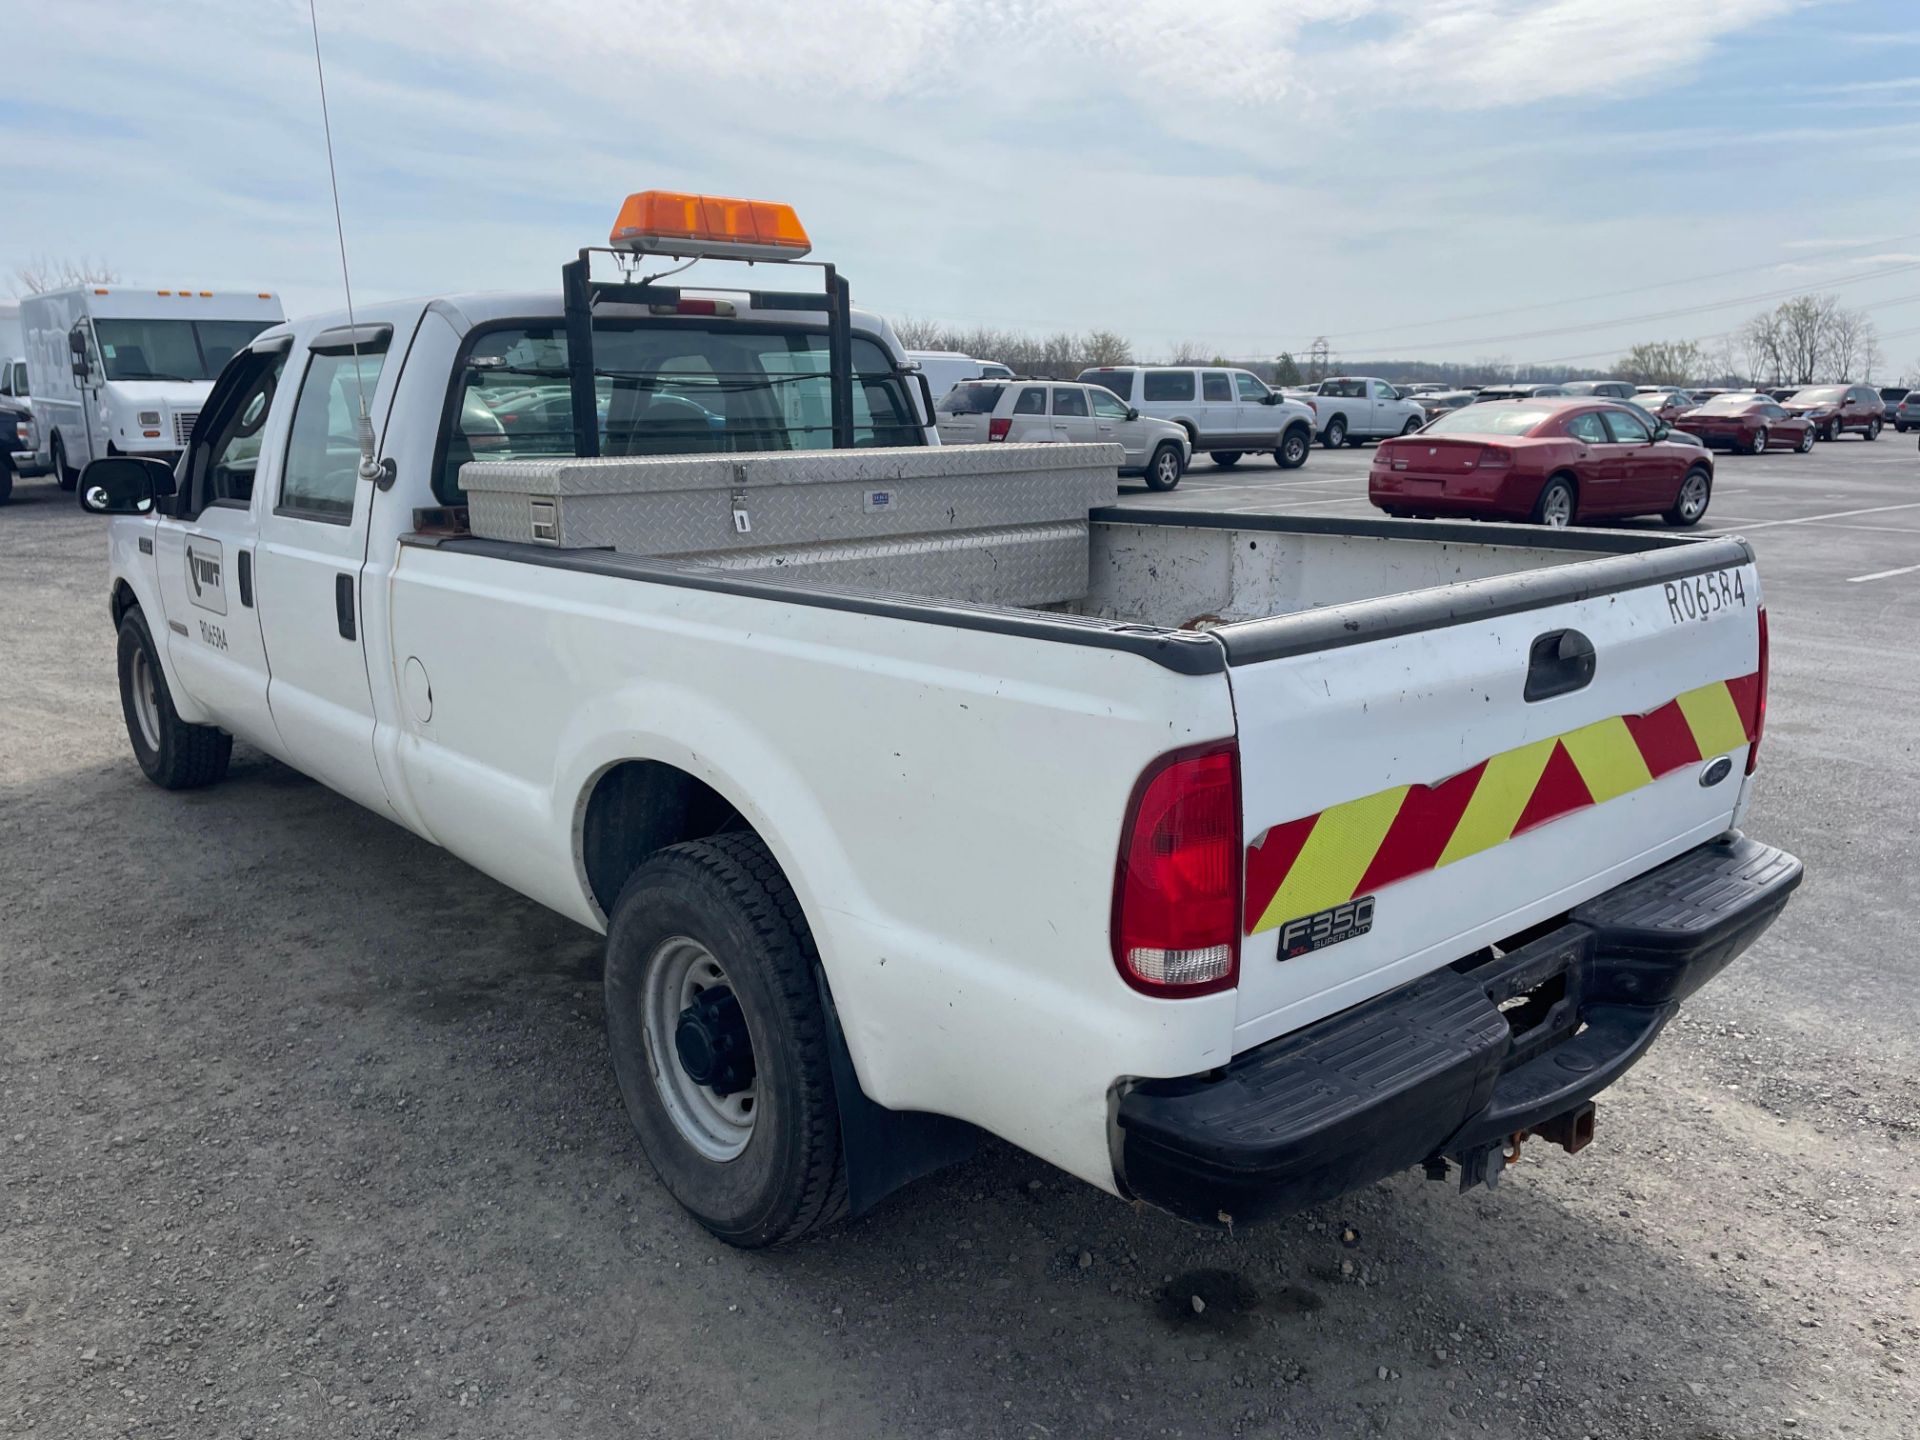 2003 Ford F350 Crew Cab Pick up Truck - Image 2 of 21